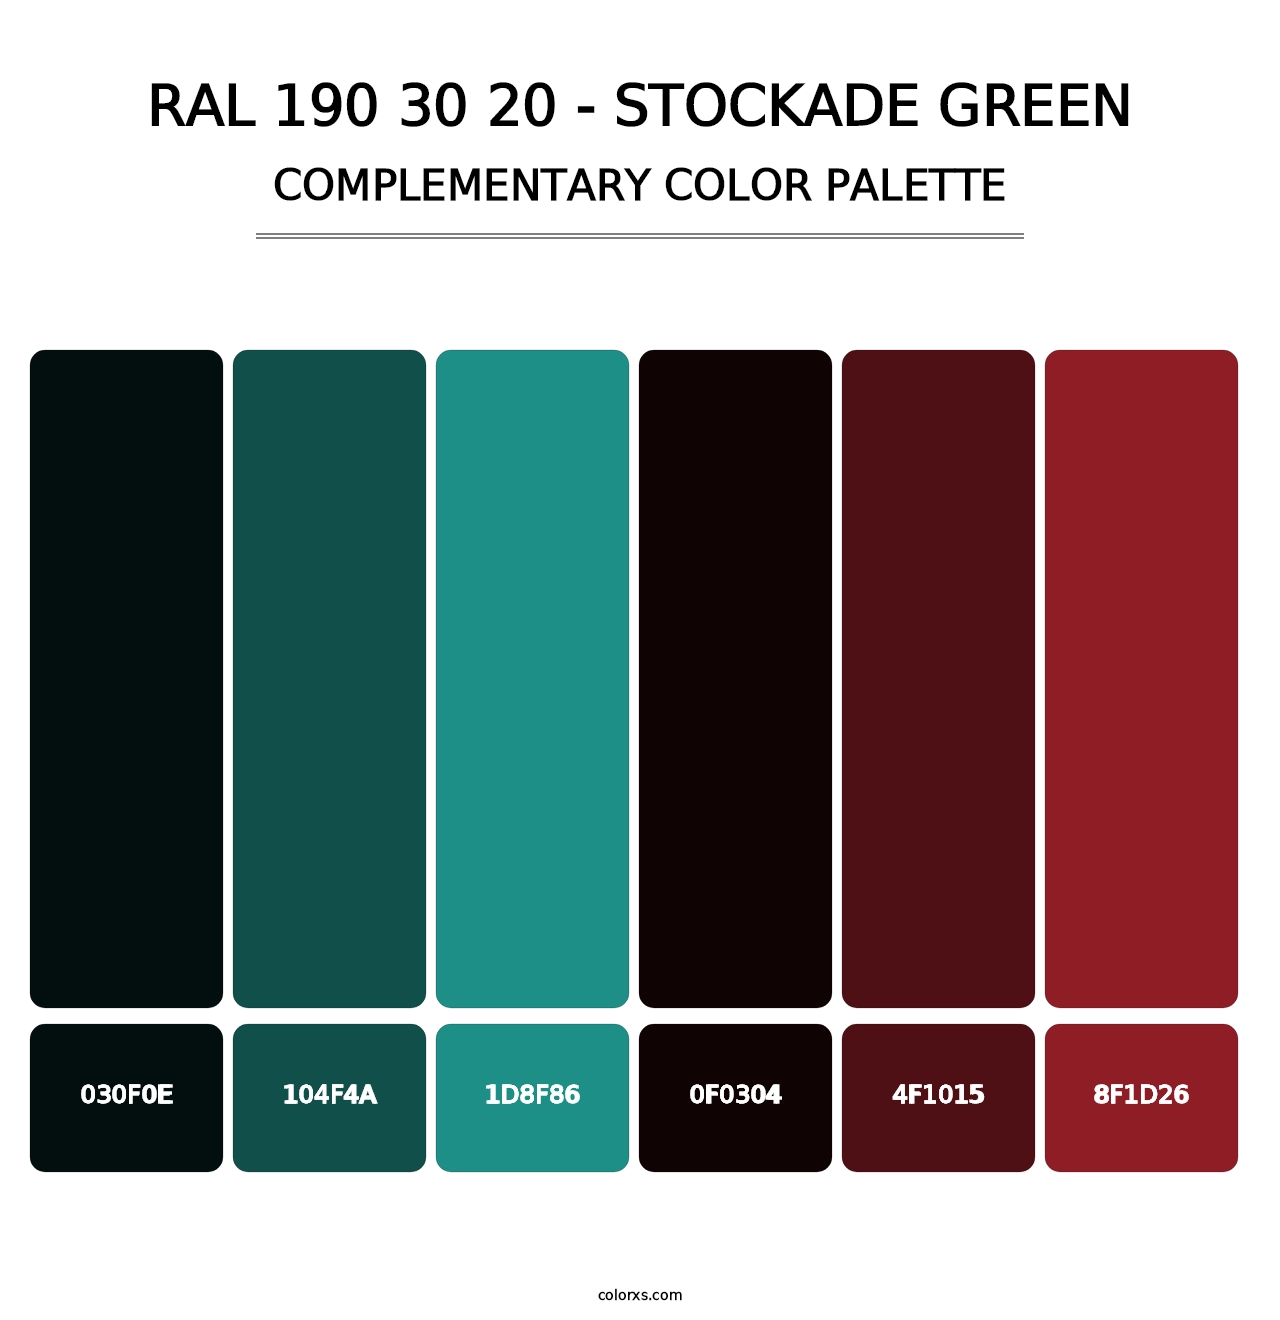 RAL 190 30 20 - Stockade Green - Complementary Color Palette